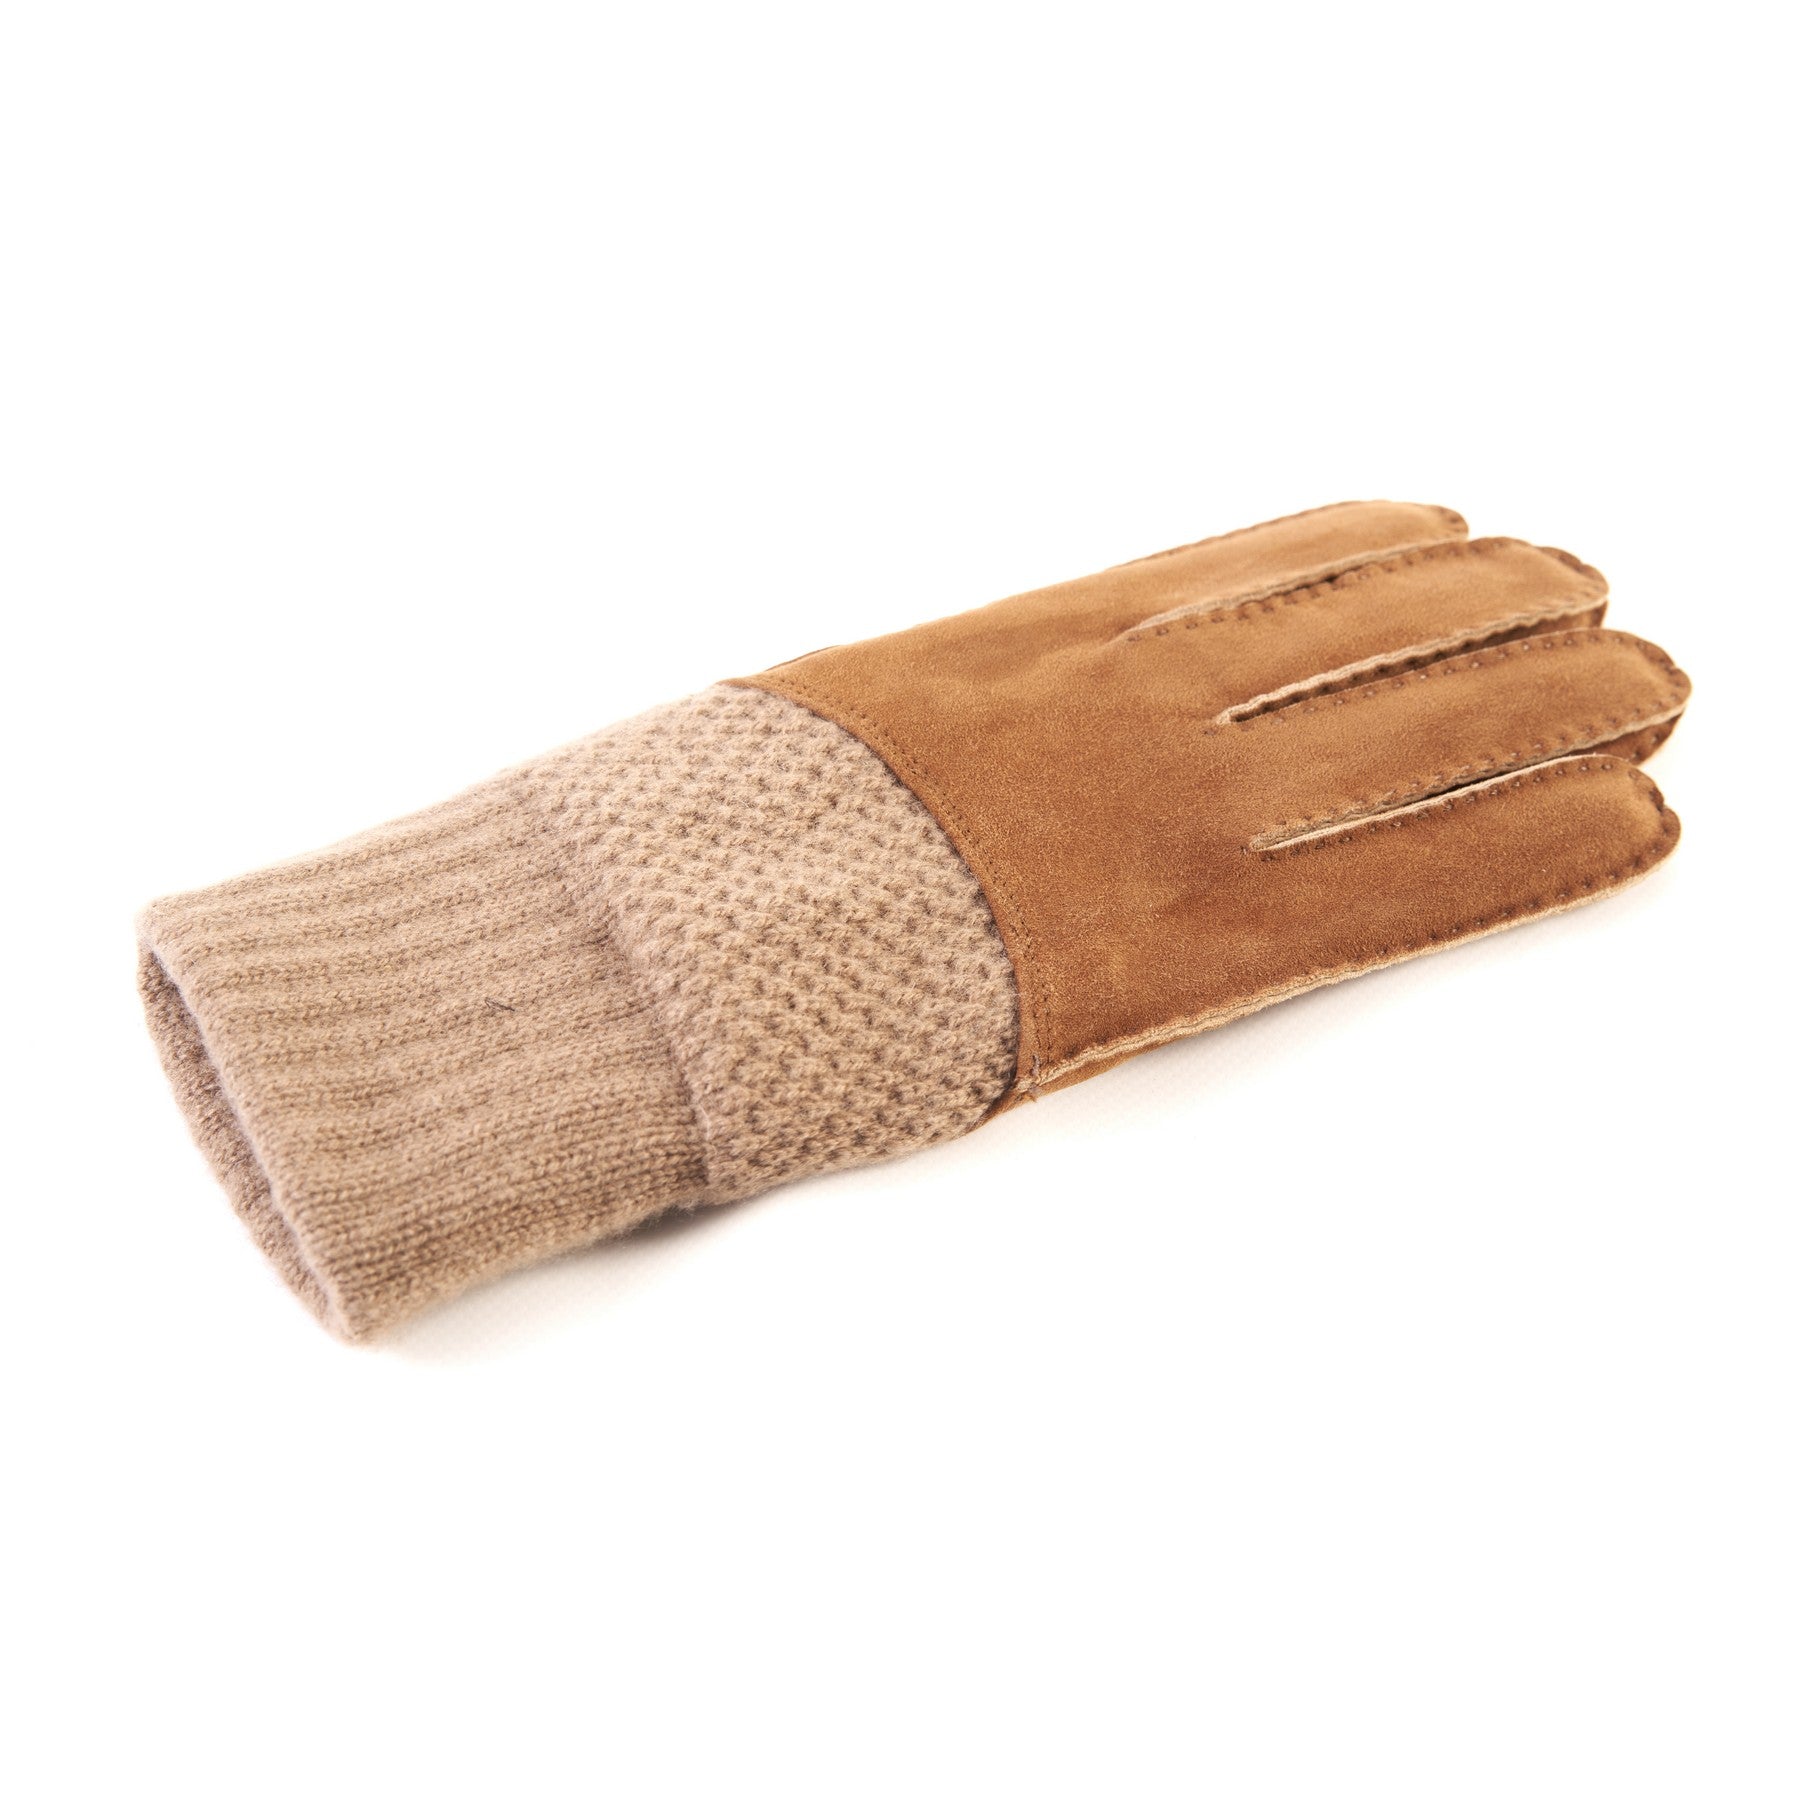 Men's hand-stitched tobacco suede gloves with cashmere top and lining